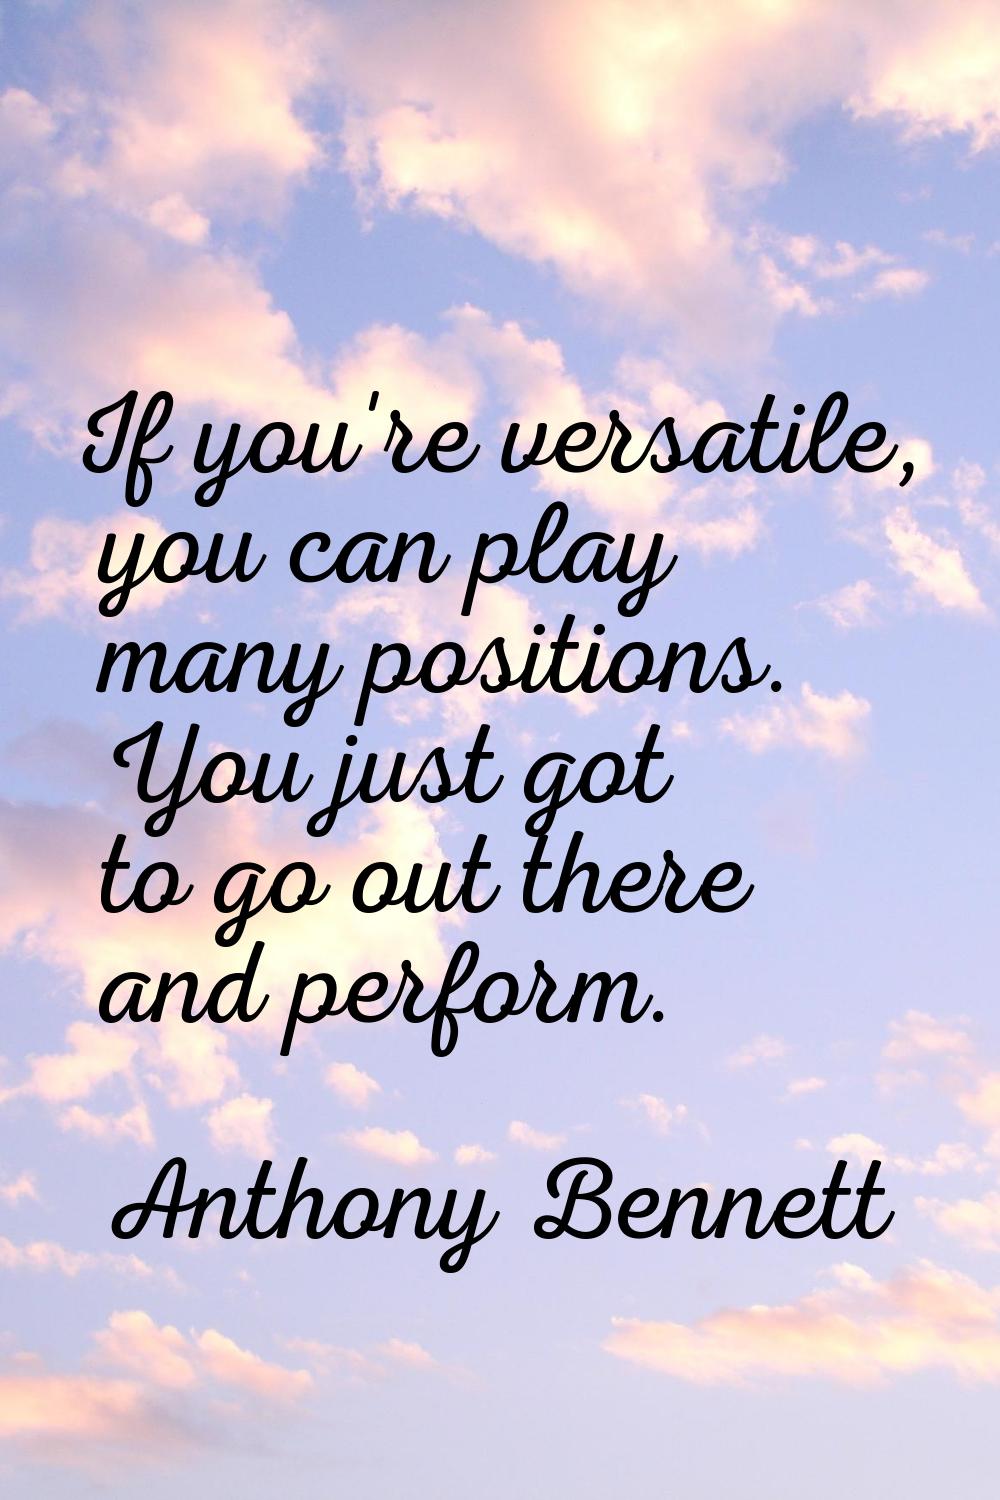 If you're versatile, you can play many positions. You just got to go out there and perform.